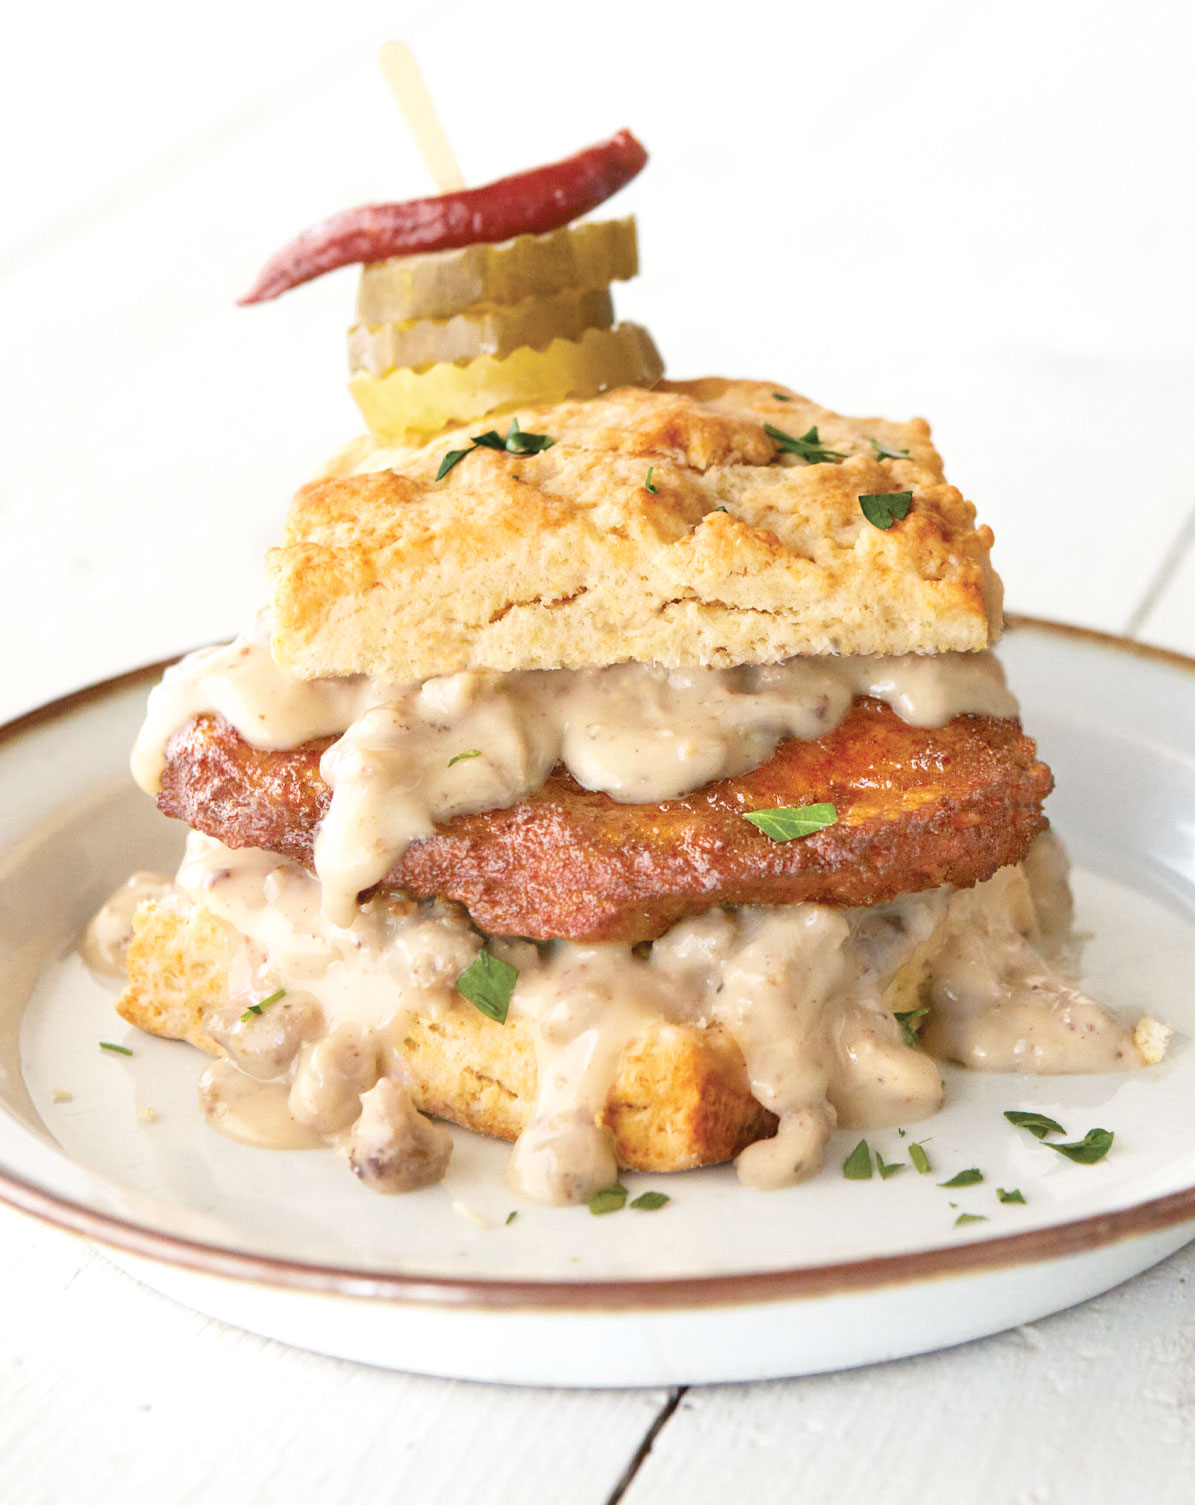 battered sous-vide chicken in a biscuit sandwich with gravy